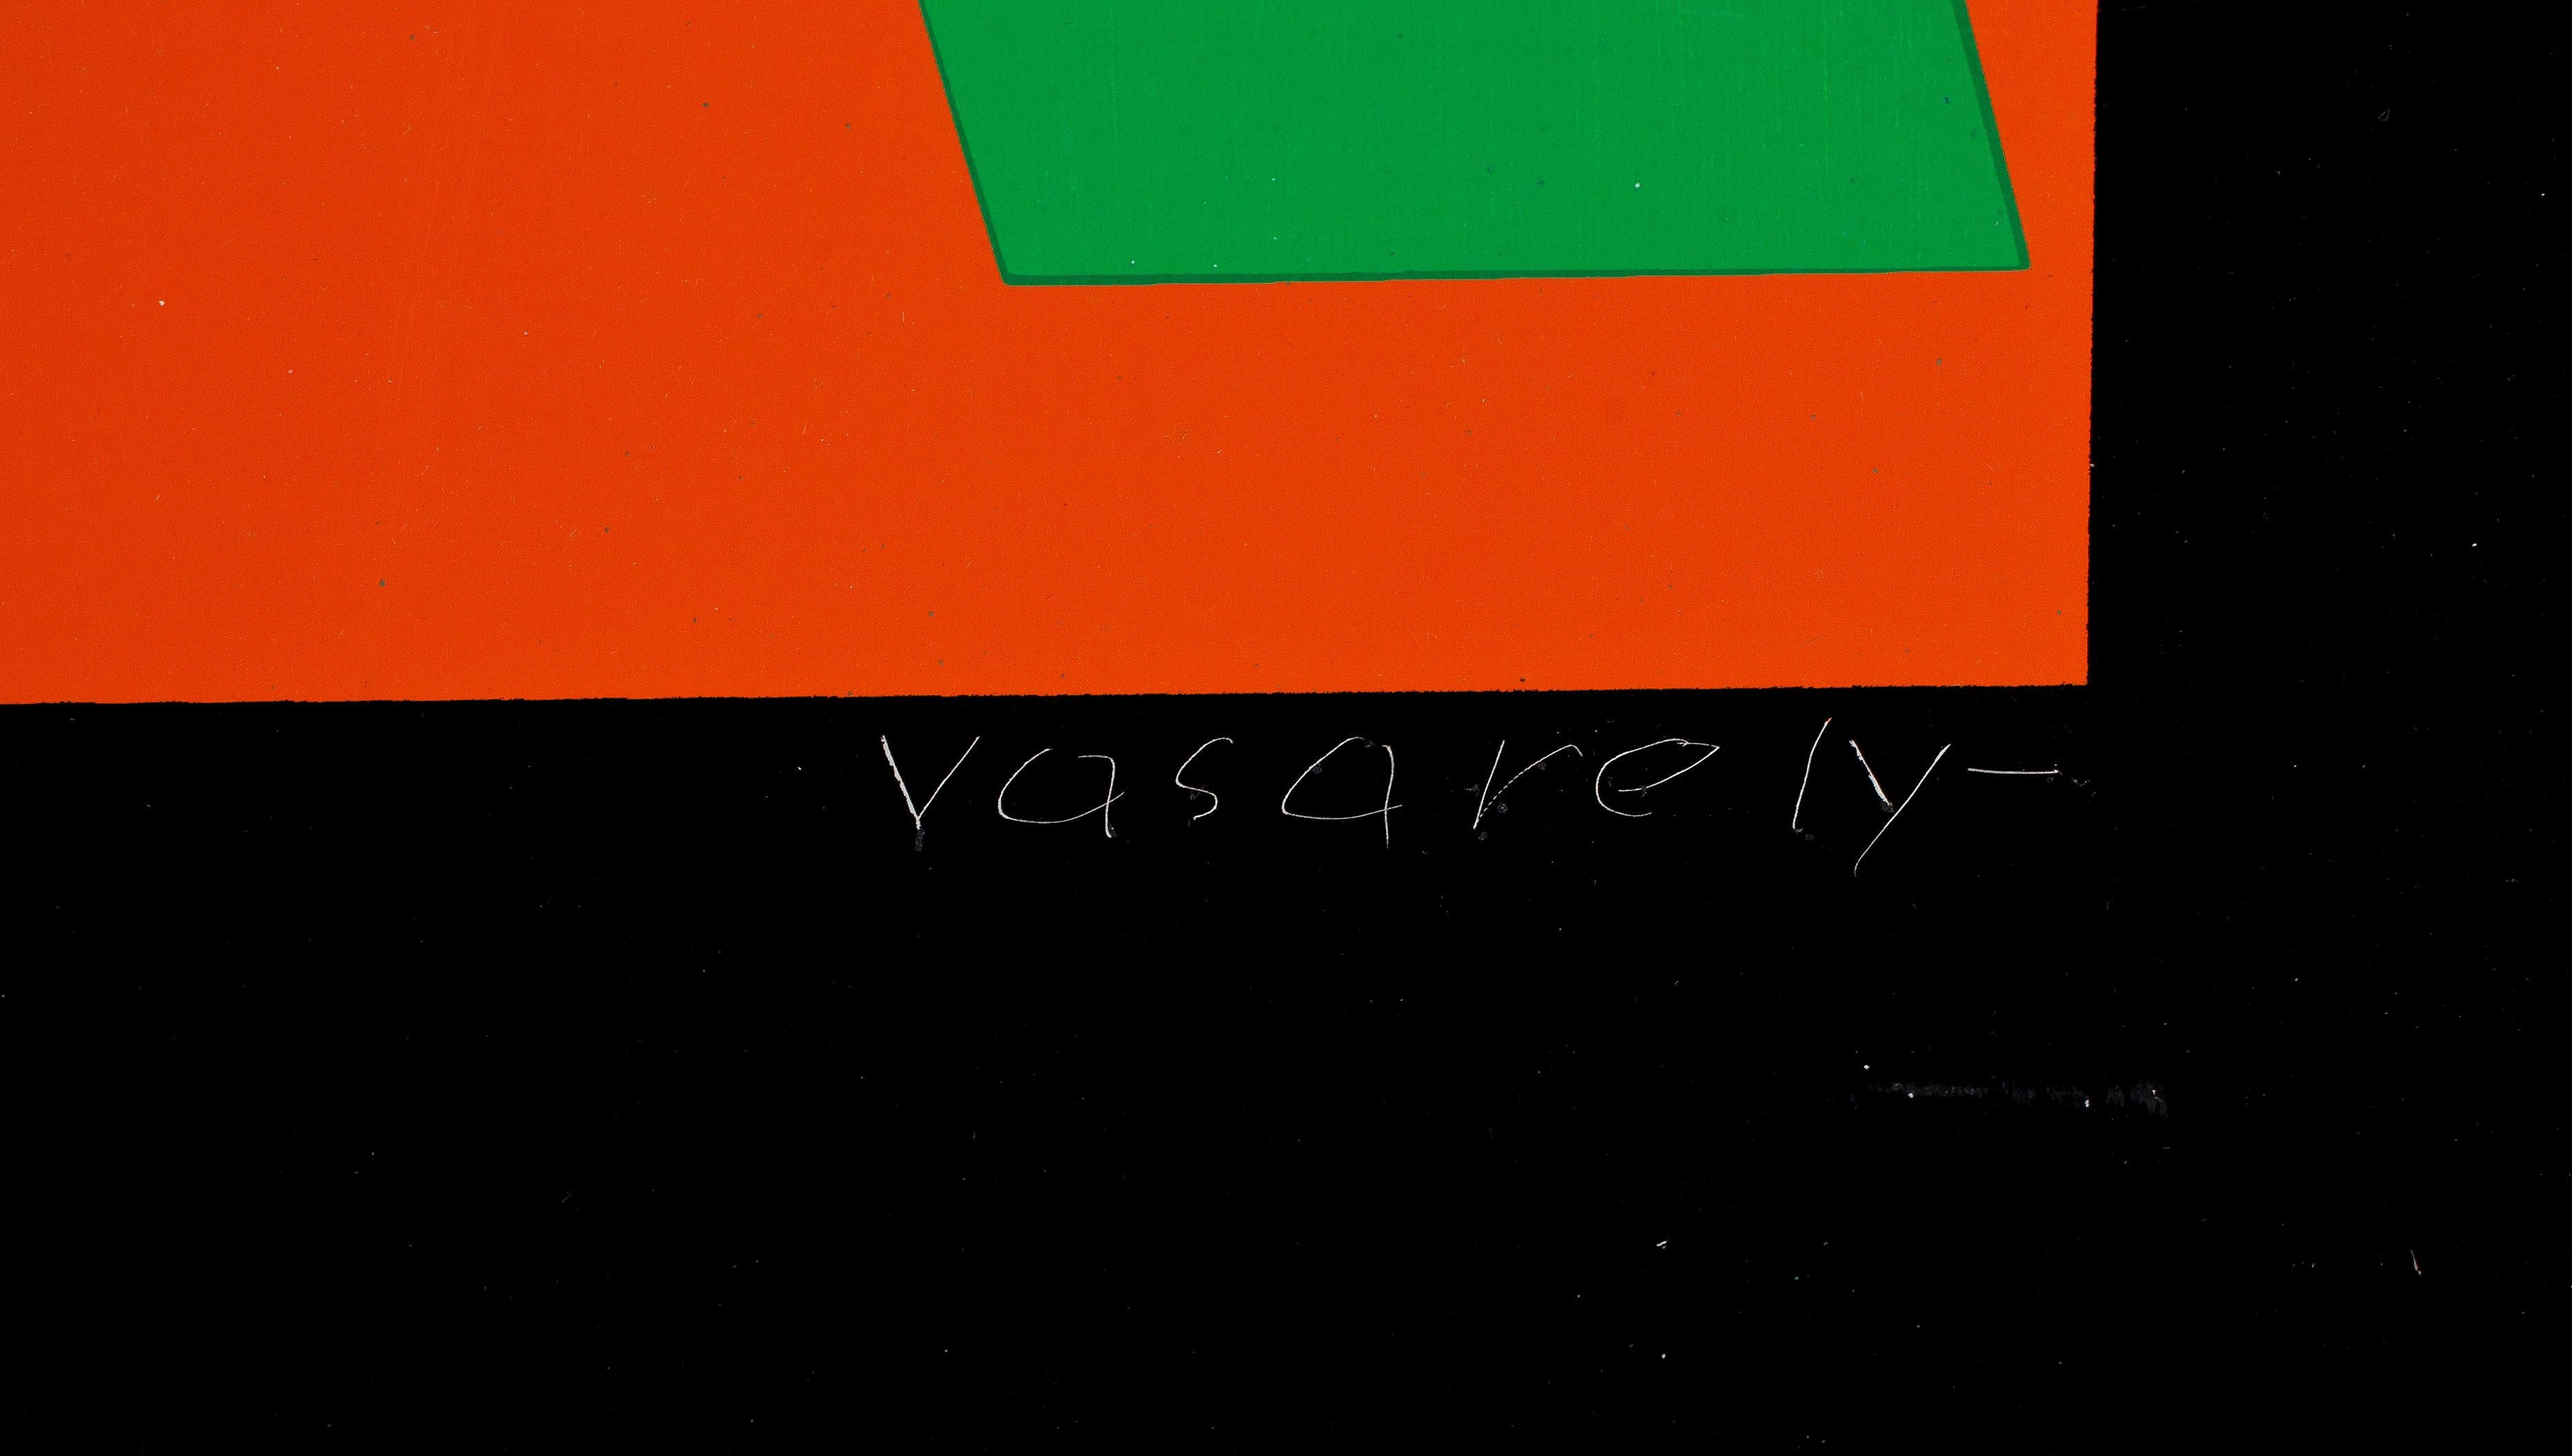 multiple on metal by Victor Vasarely Geometric composition Signed France 1970
Geometric composition on metal engraved signature and numbered 45/160
Good condition, some light scratches
Victor Vasarely, the strategy of the Multiple